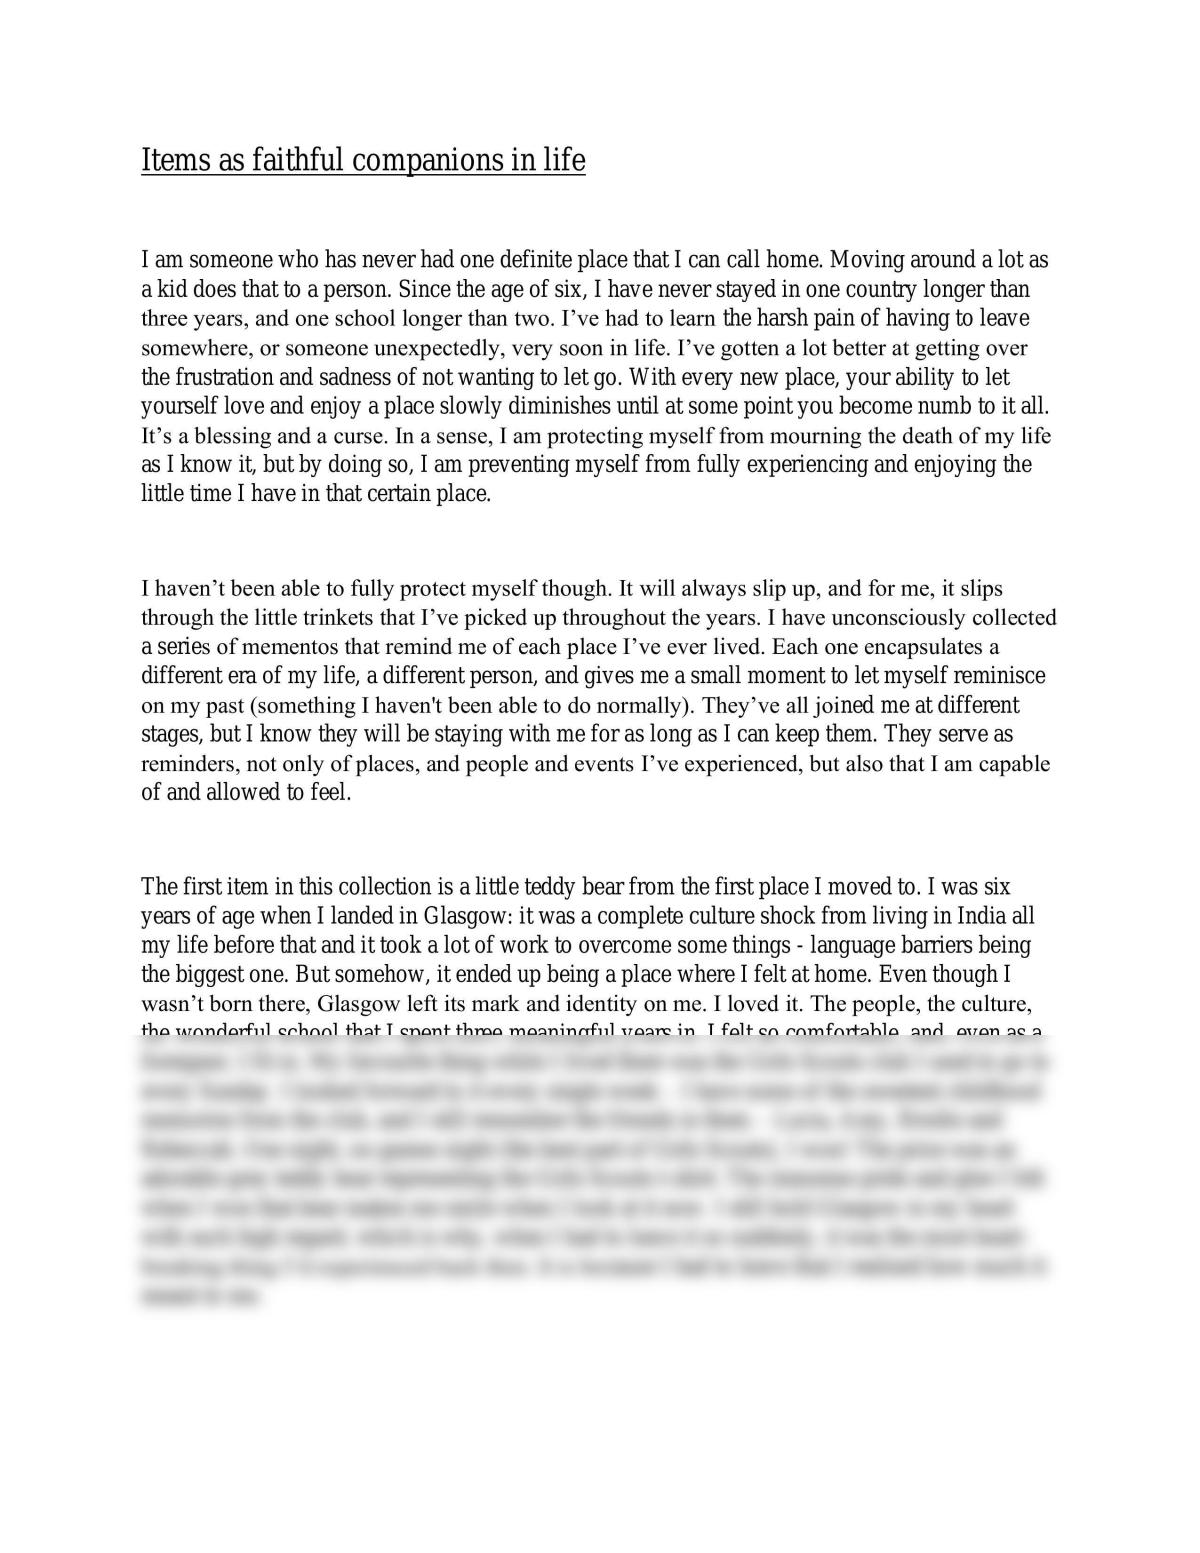 personal essay on freedom leaving cert